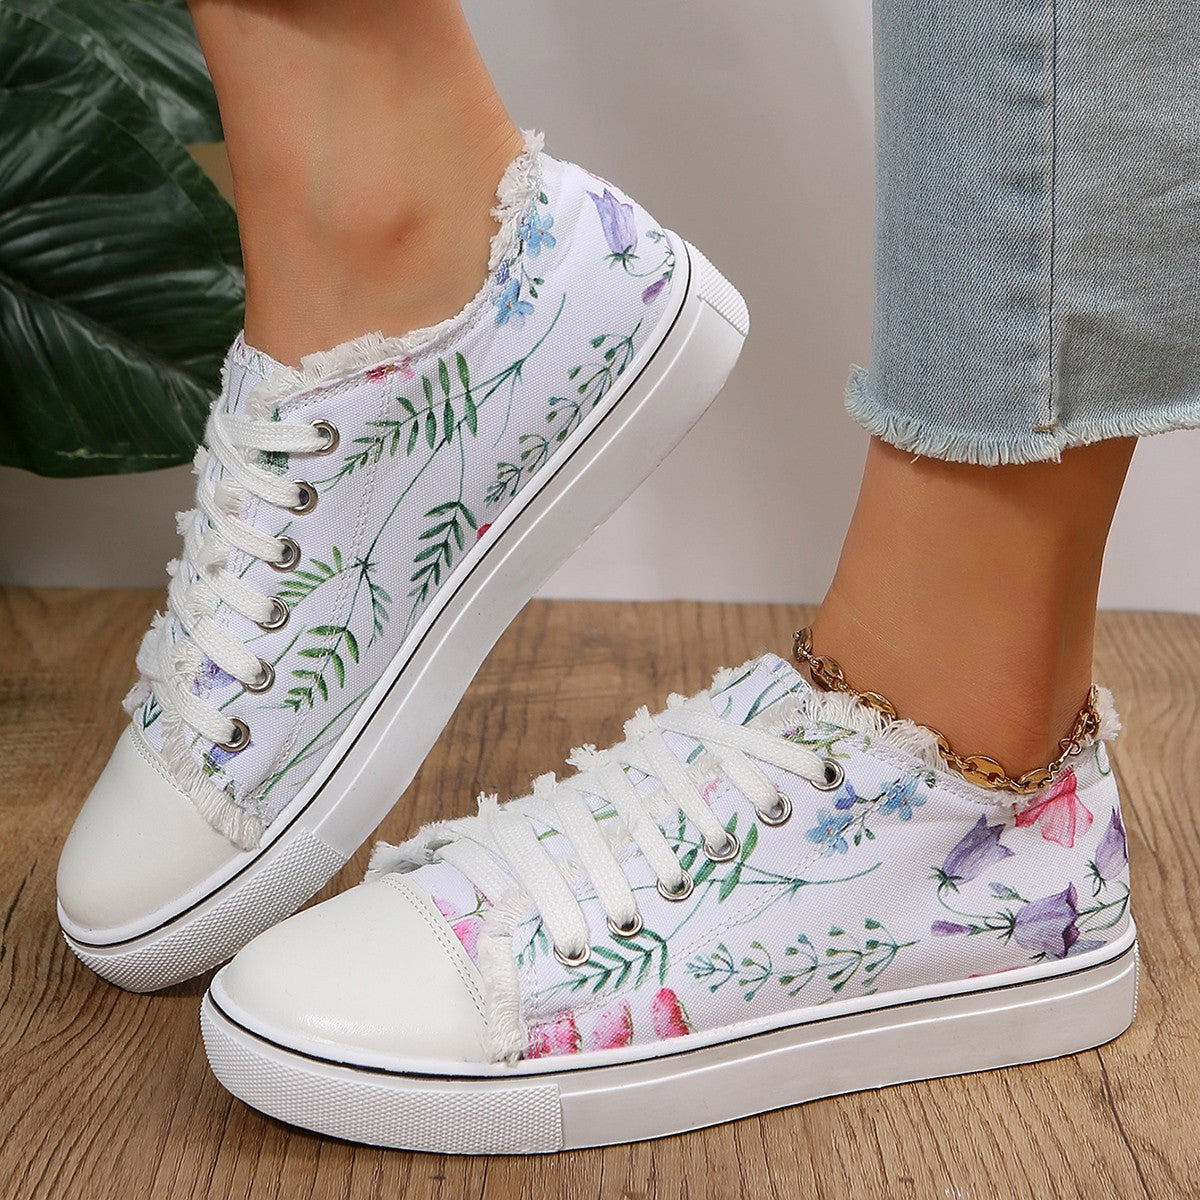 Trainers & Sneakers  | Casual Flat Canvas Shoes Flowers Lace-up Flowers Print Loafers Women Walking Shoes | White Green Twig |  36.| thecurvestory.myshopify.com